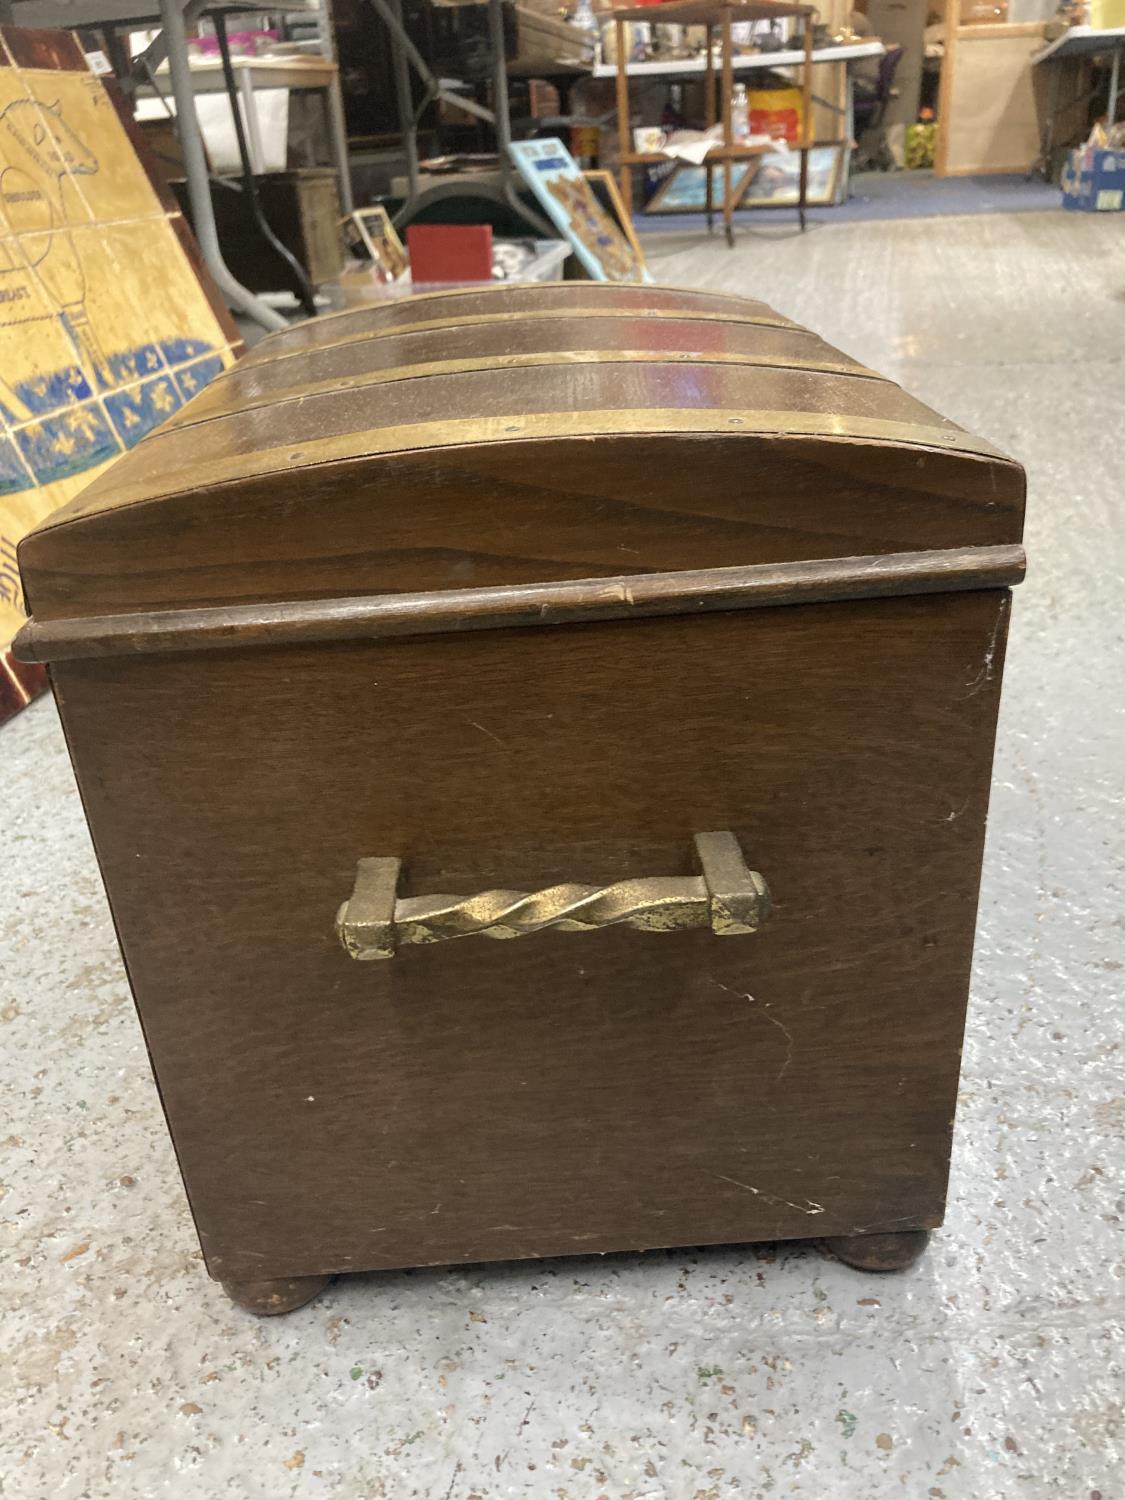 A VINTAGE MAHOGANY COAL BOX WITH INNER TIN LINING, BRASS BANDING AND HANDLES ON BUN FEET HEIGHT 31. - Image 2 of 4